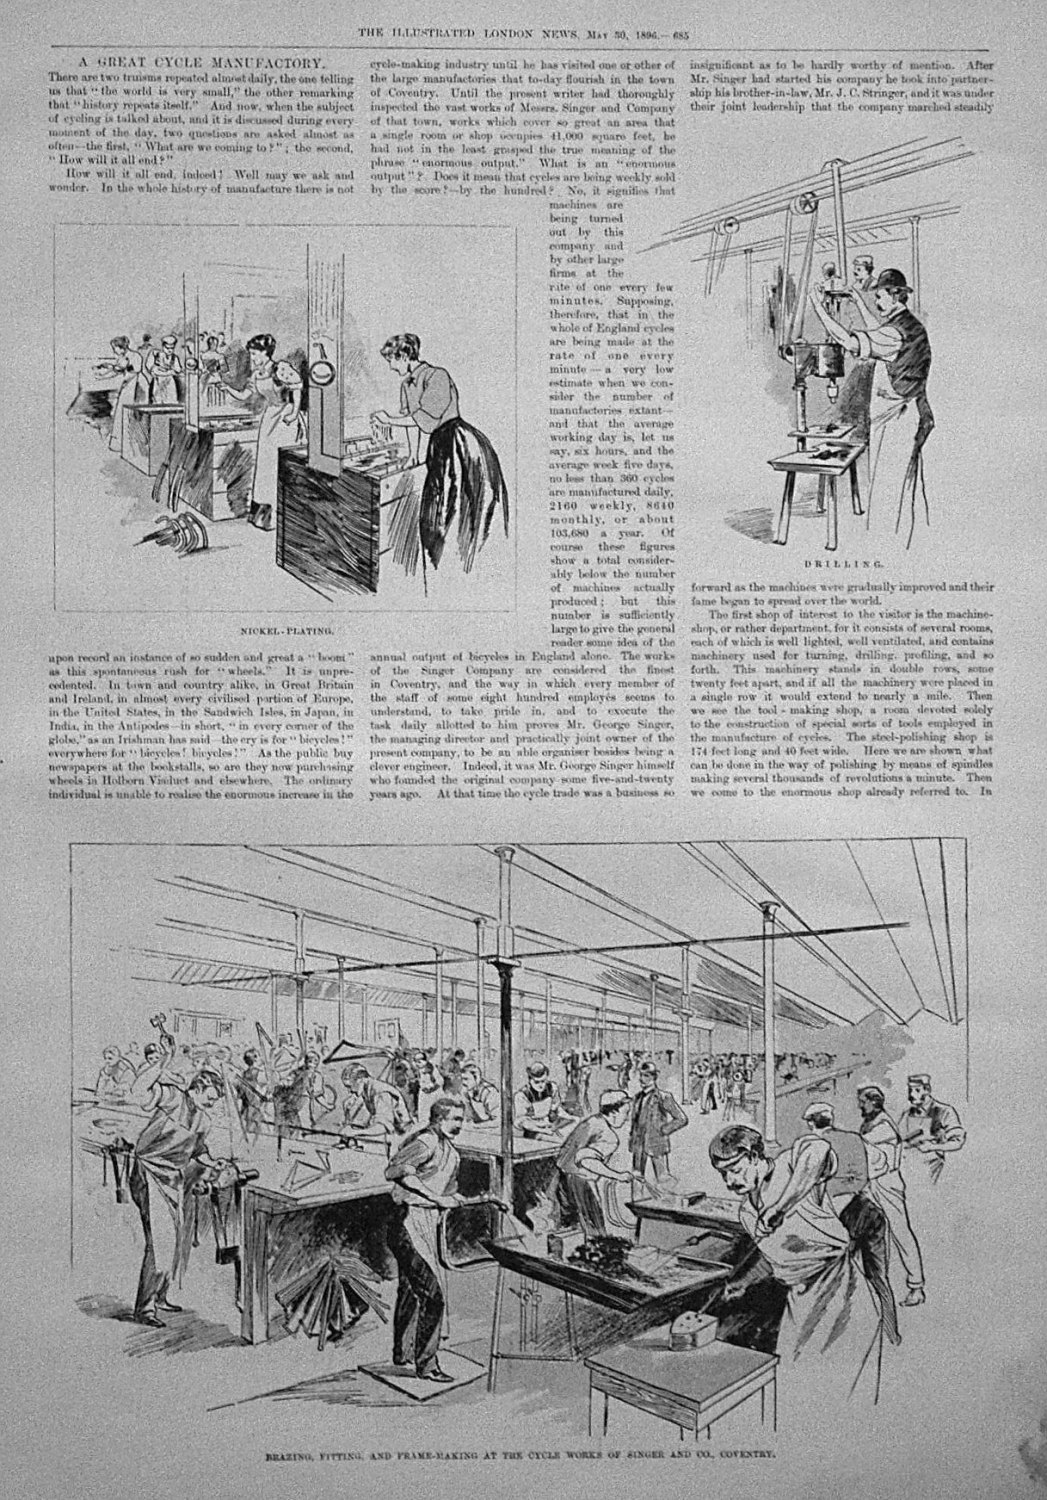 A Great Cycle Manufactory. 1896